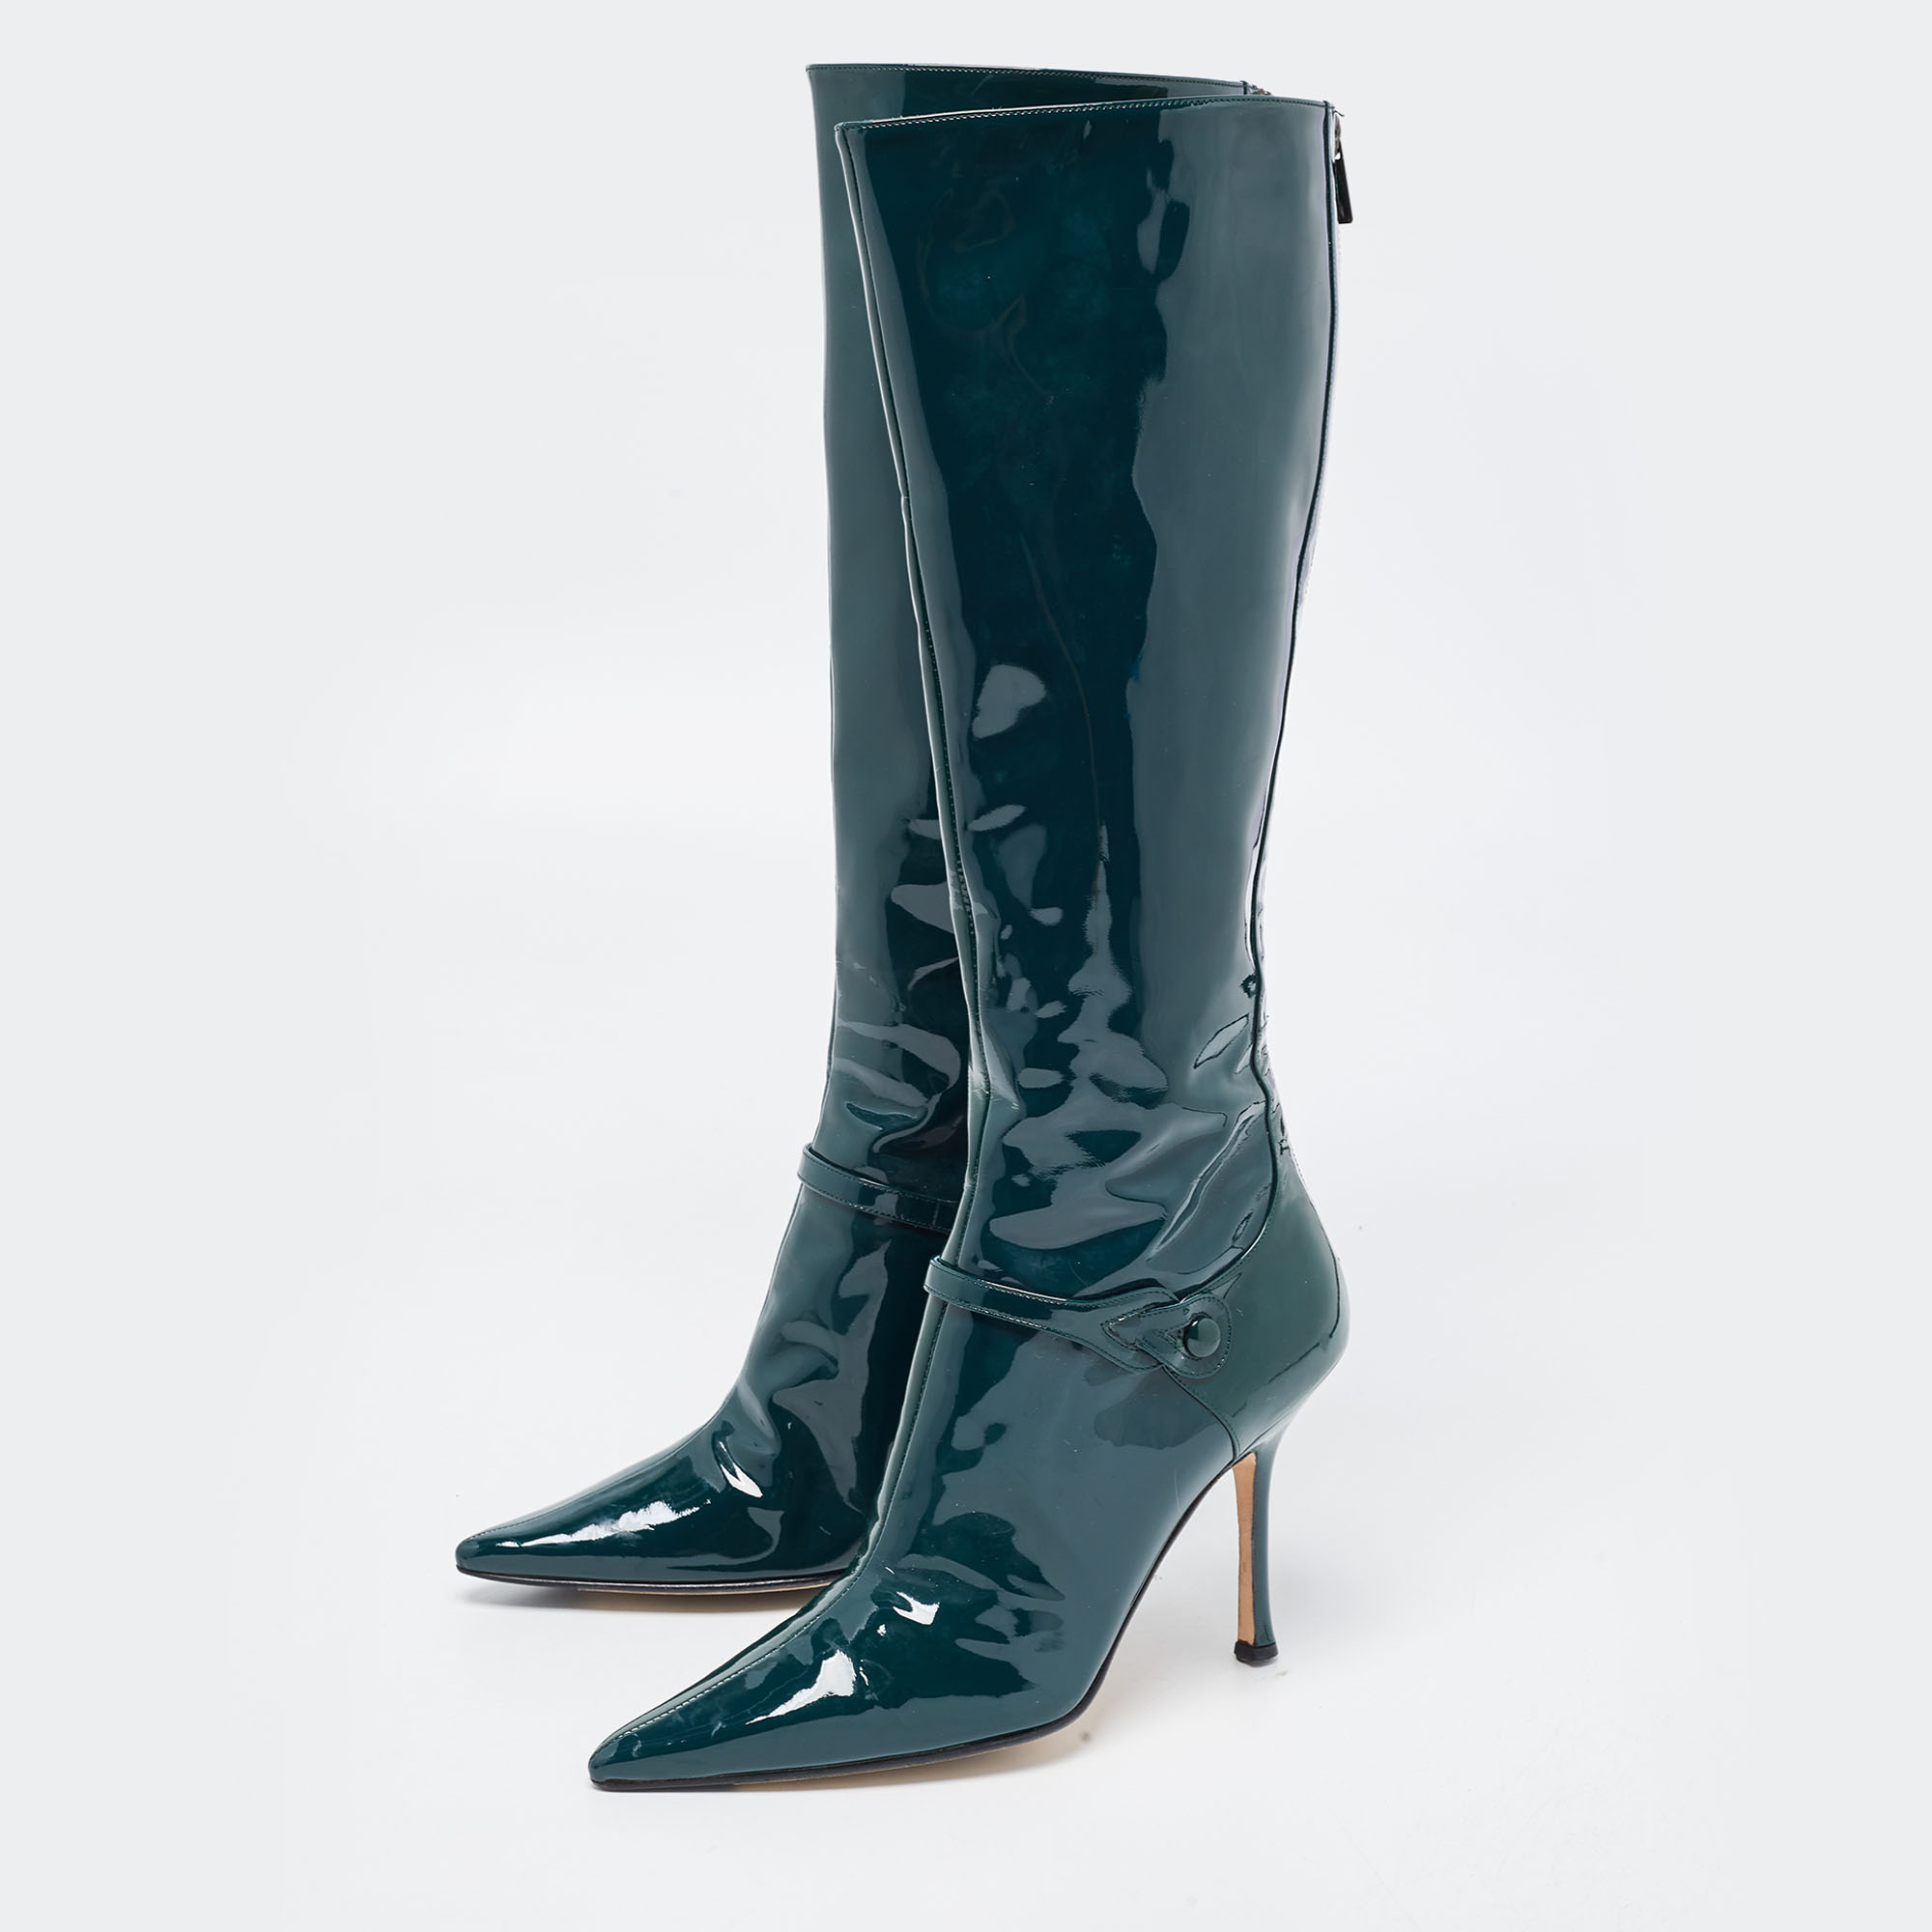 

Jimmy Choo Green Patent Leather Calf Length Boots Size